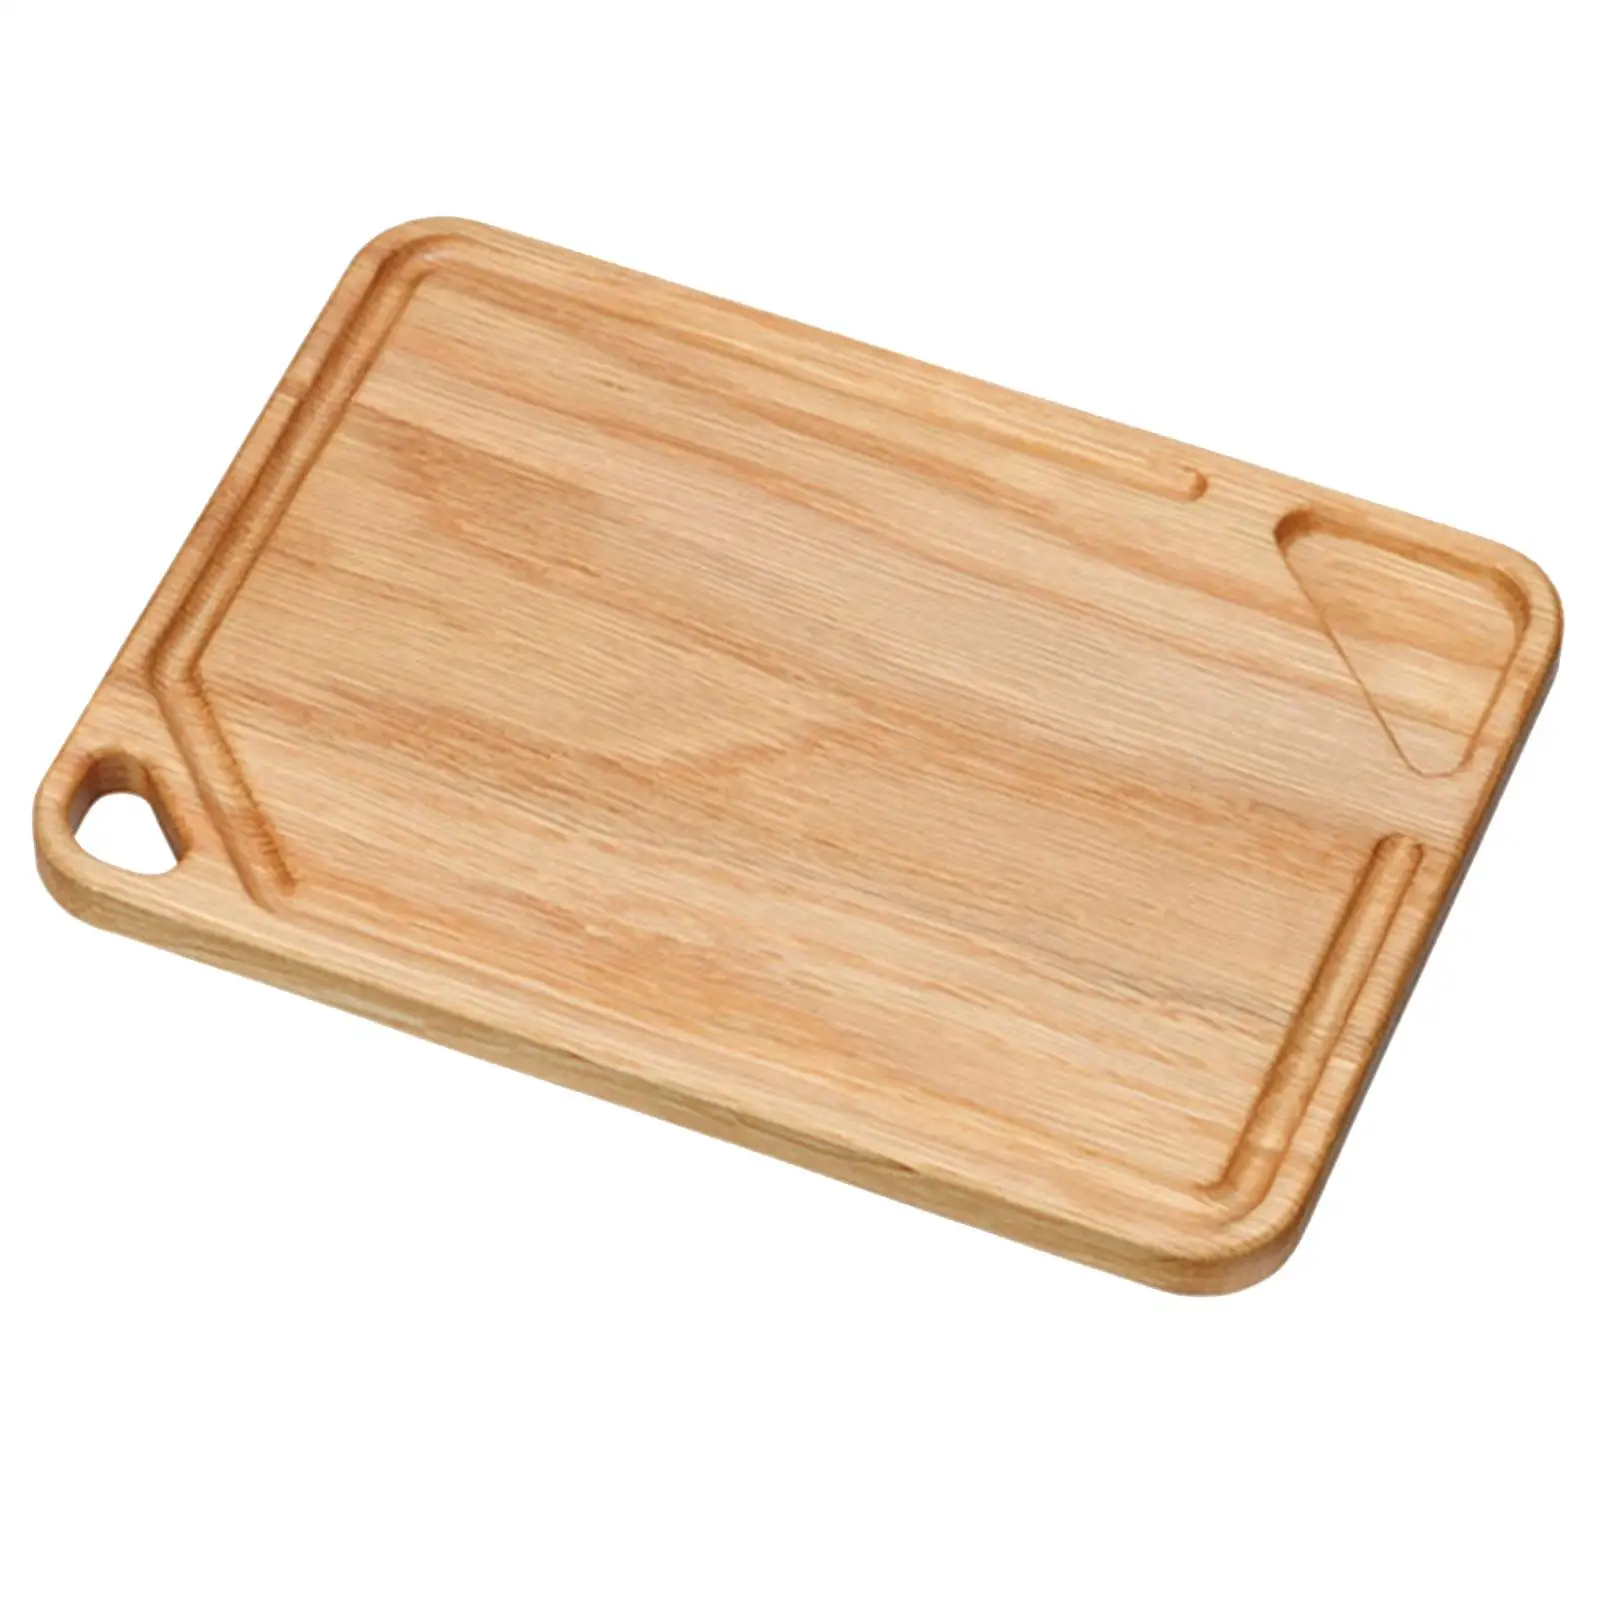 Household Cutting Board Tray Serving Tray Multipurpose Japanese Wooden Tray Food Tray for Vegetables Steak Fruits Meat